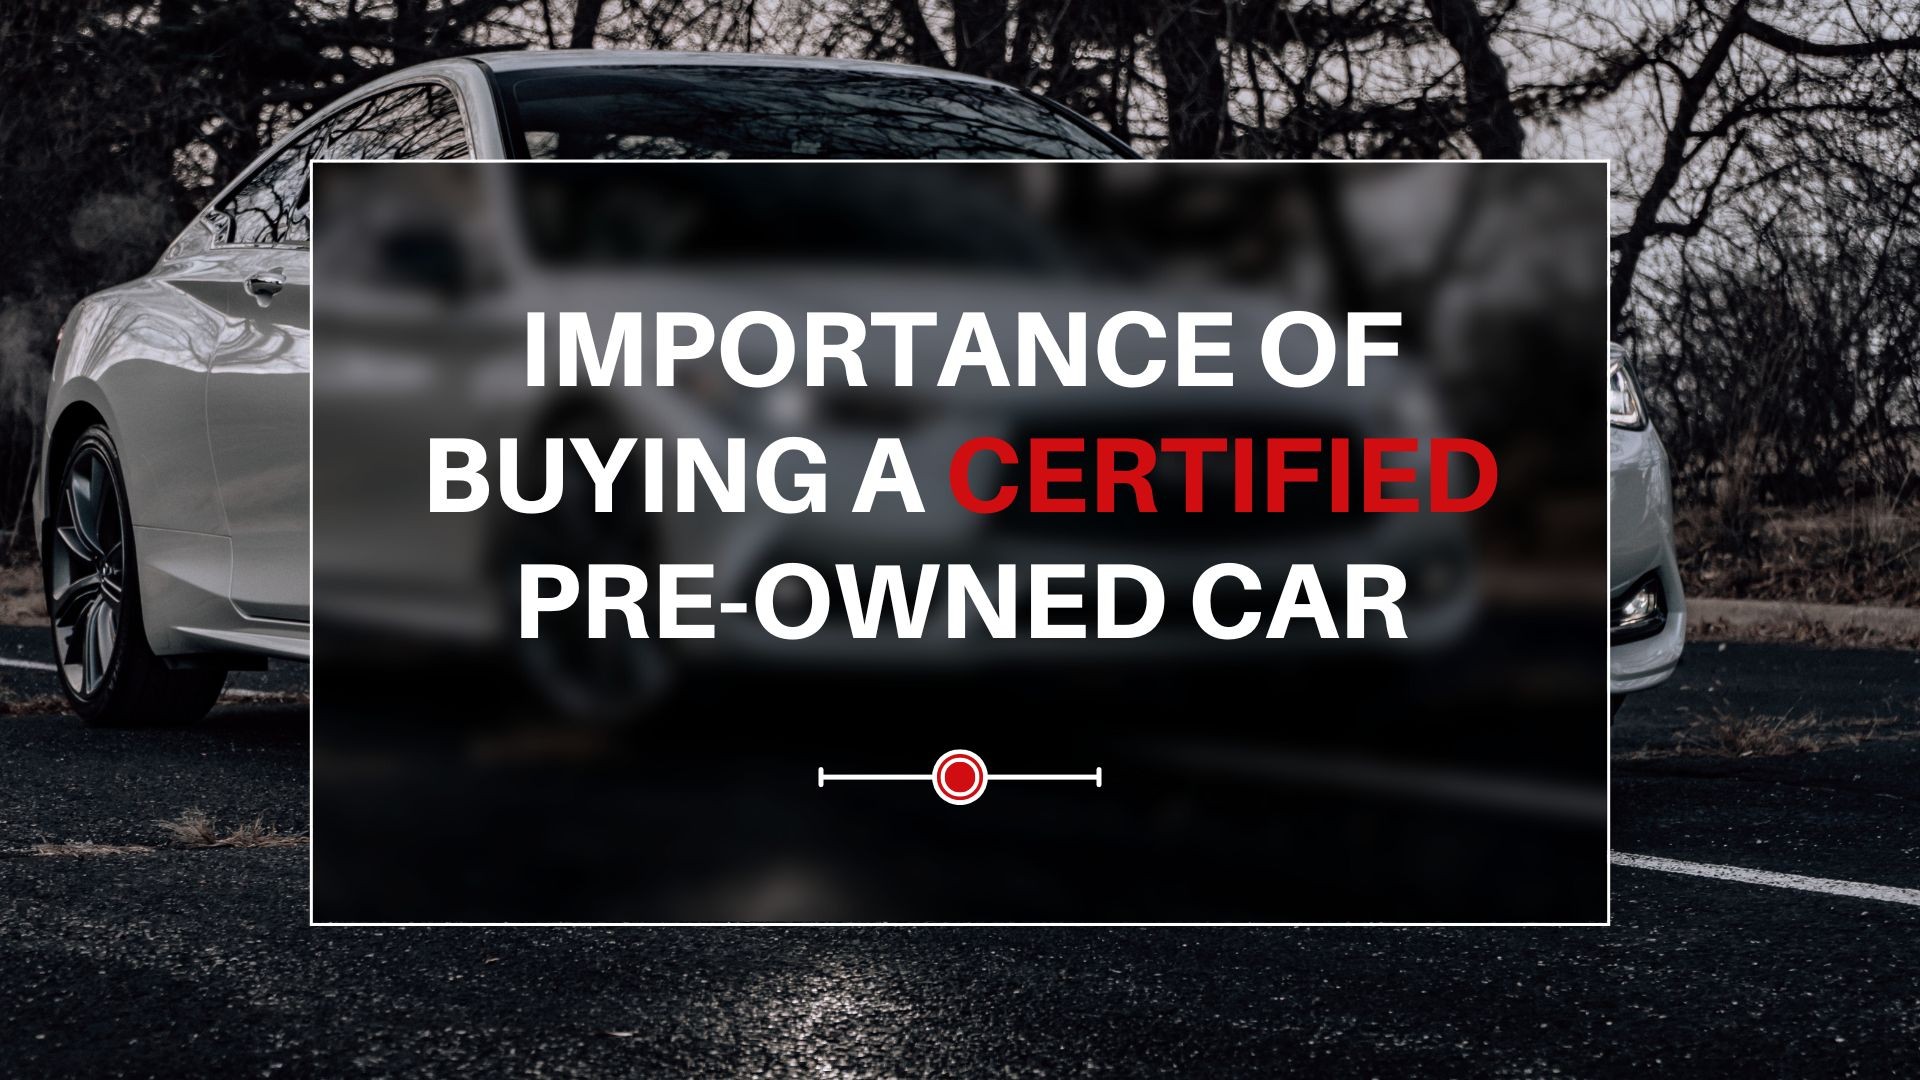 Importance of Buying a Certified Pre-Owned Car